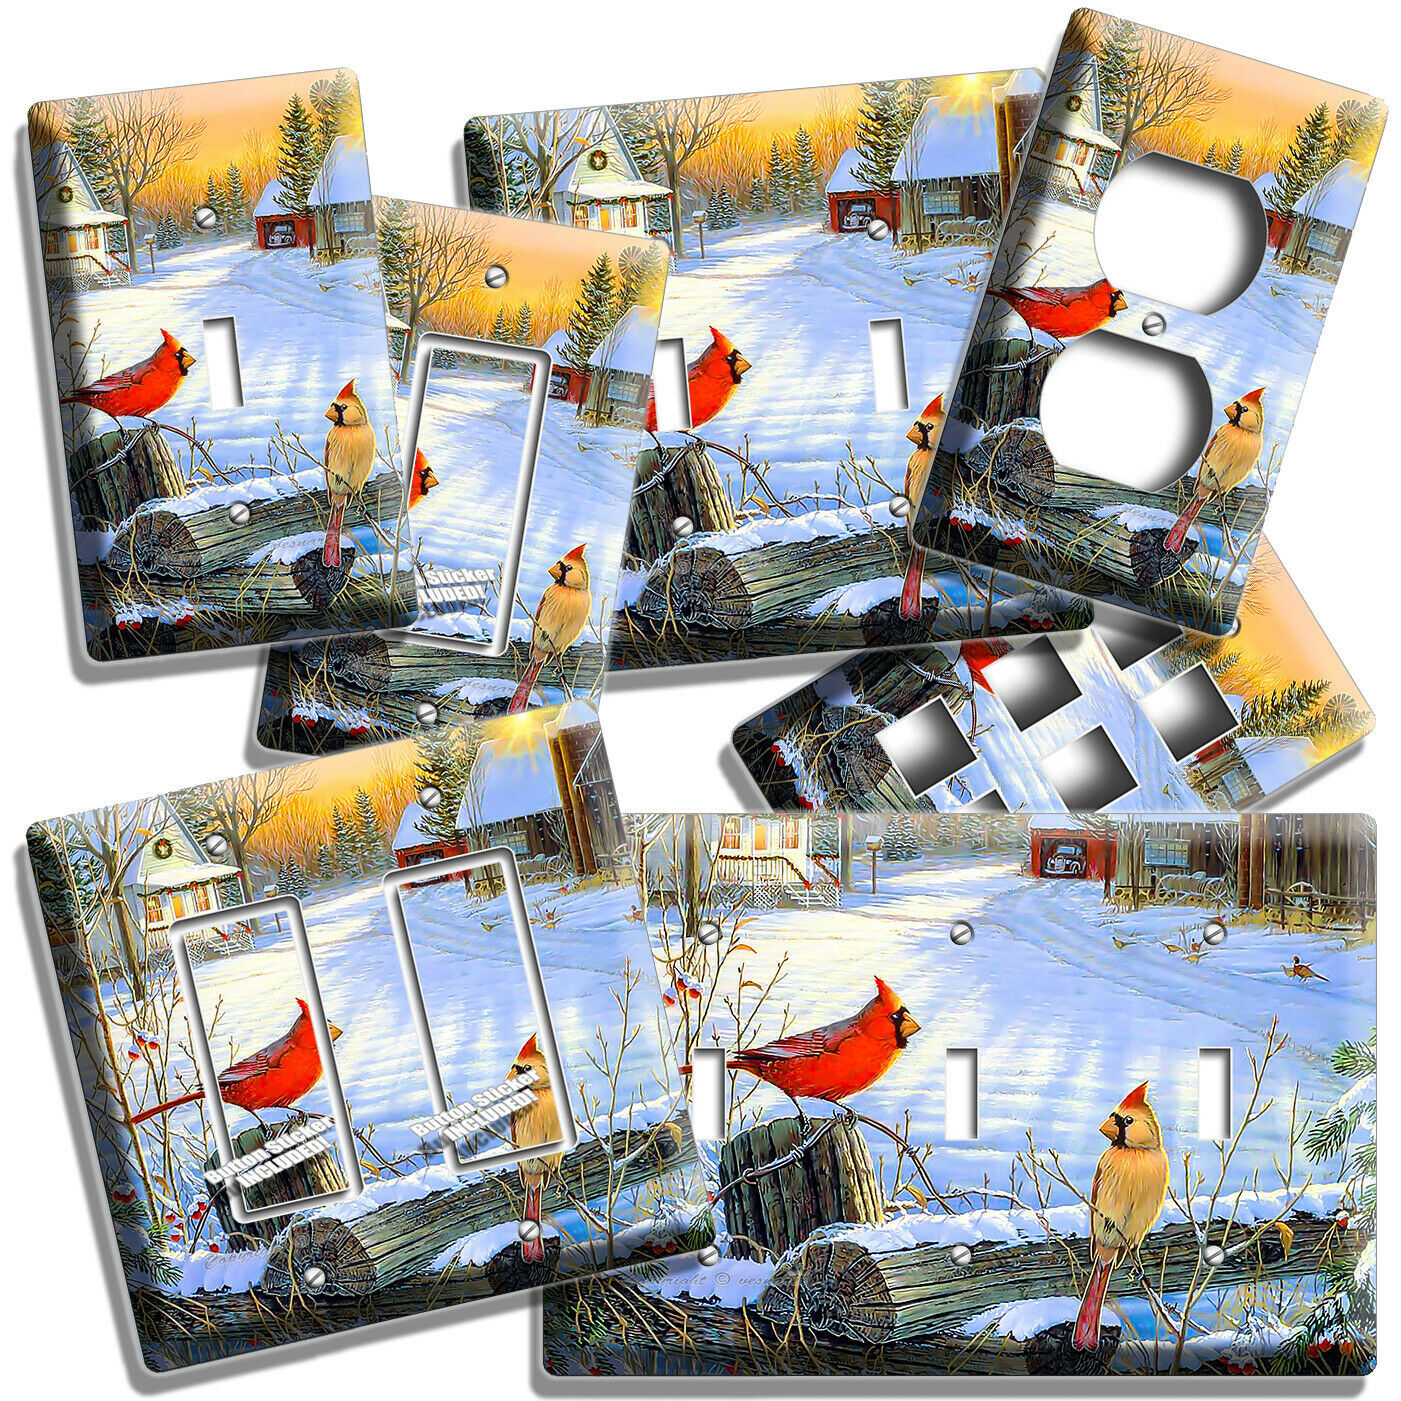 CARDINAL BIRDS CONTRY WINTER MORNING LIGHT SWITCH OUTLET WALL PLATES ROOM DECOR - $17.99 - $28.99